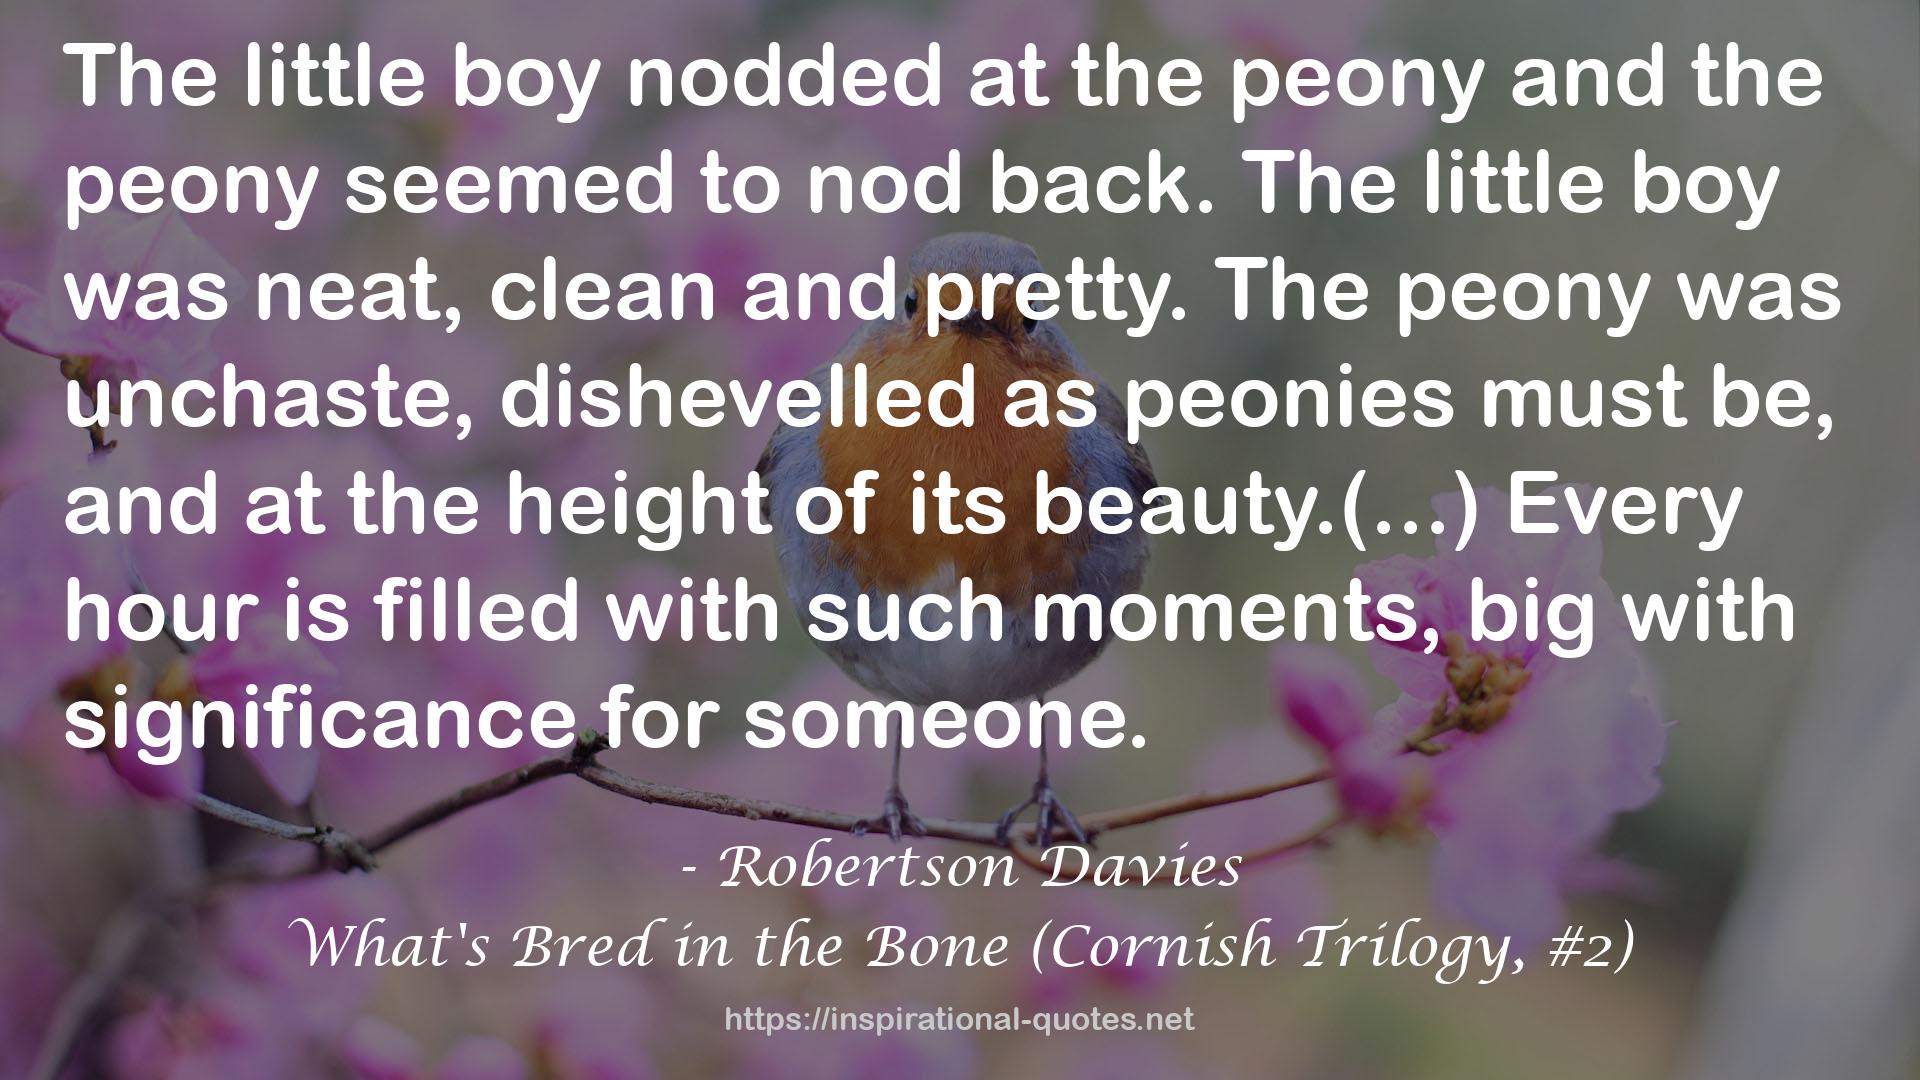 What's Bred in the Bone (Cornish Trilogy, #2) QUOTES